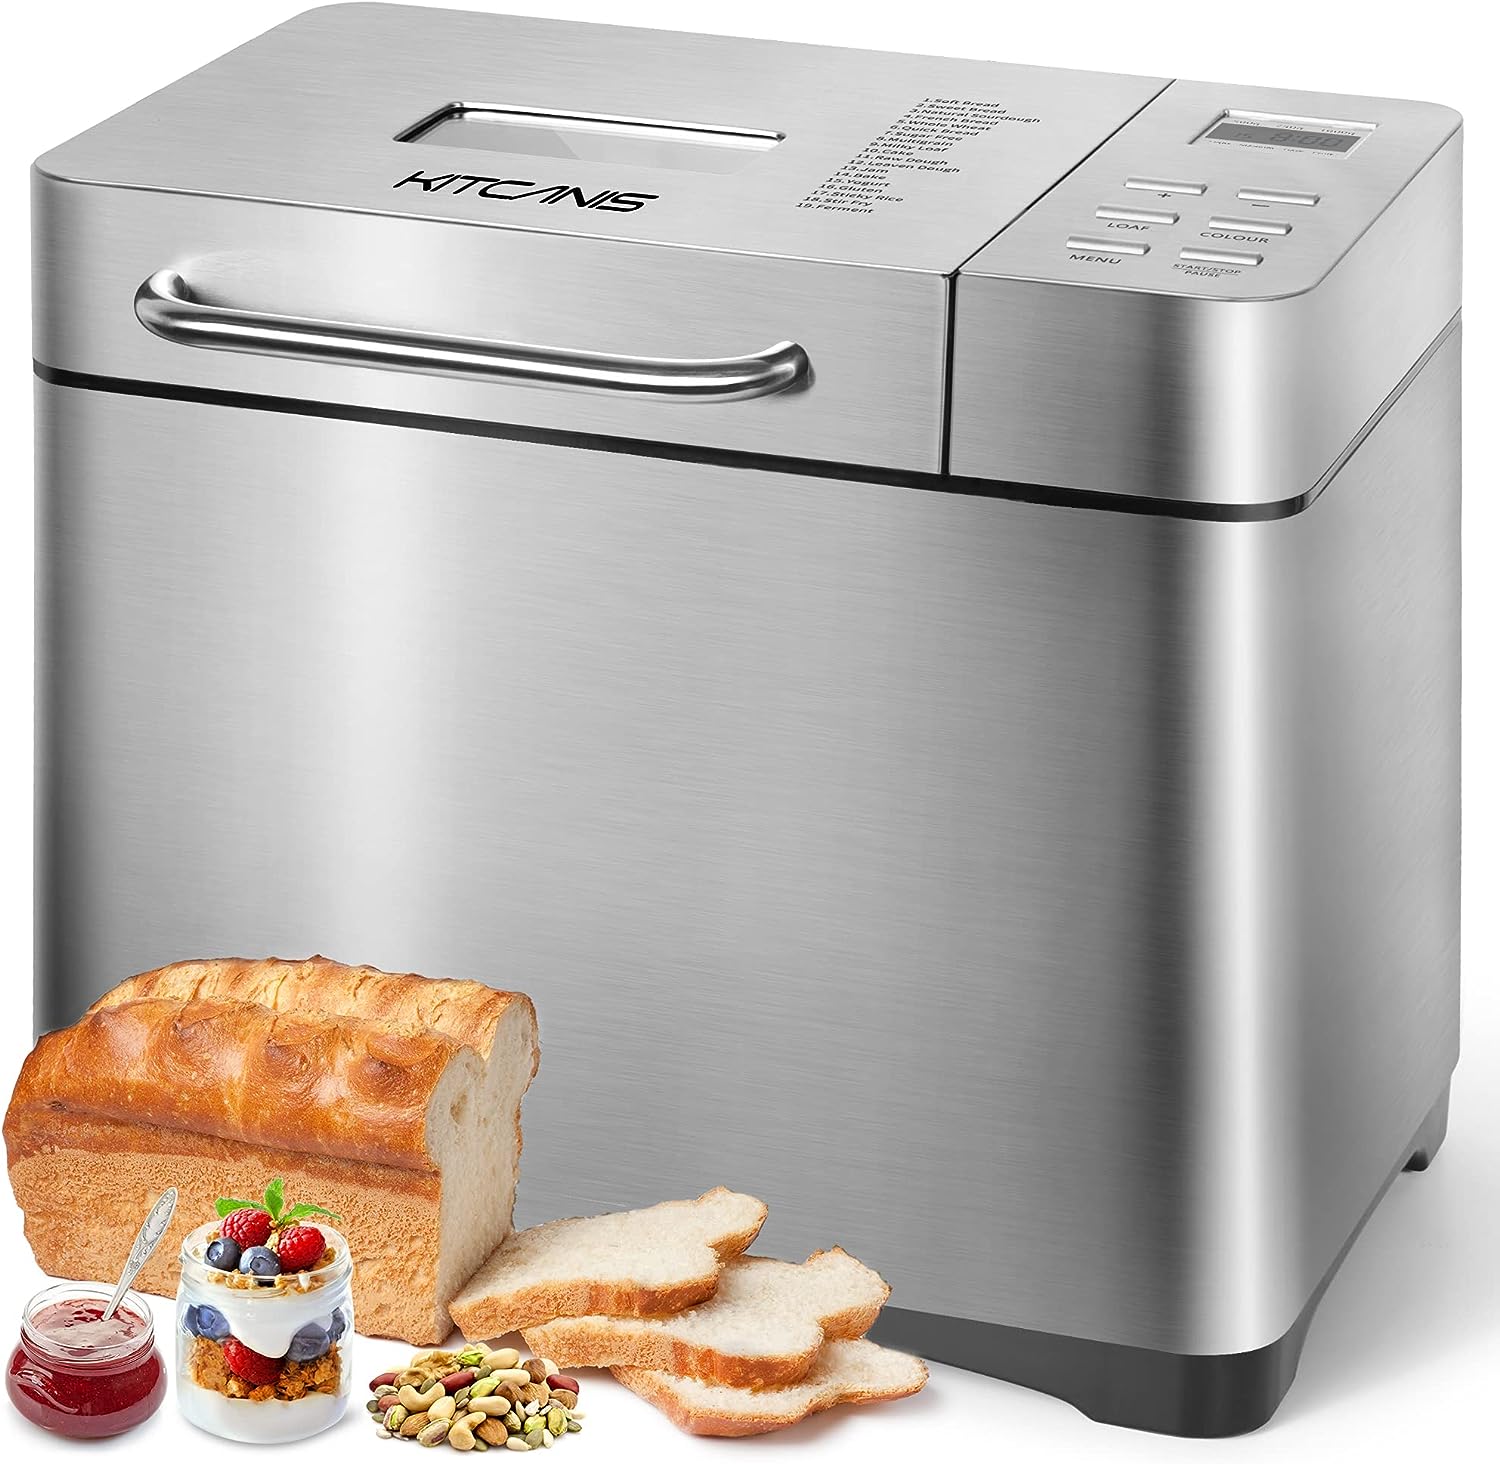 650W Bread Maker 19-in-1 Stainless Steel Automatic Bread Machine